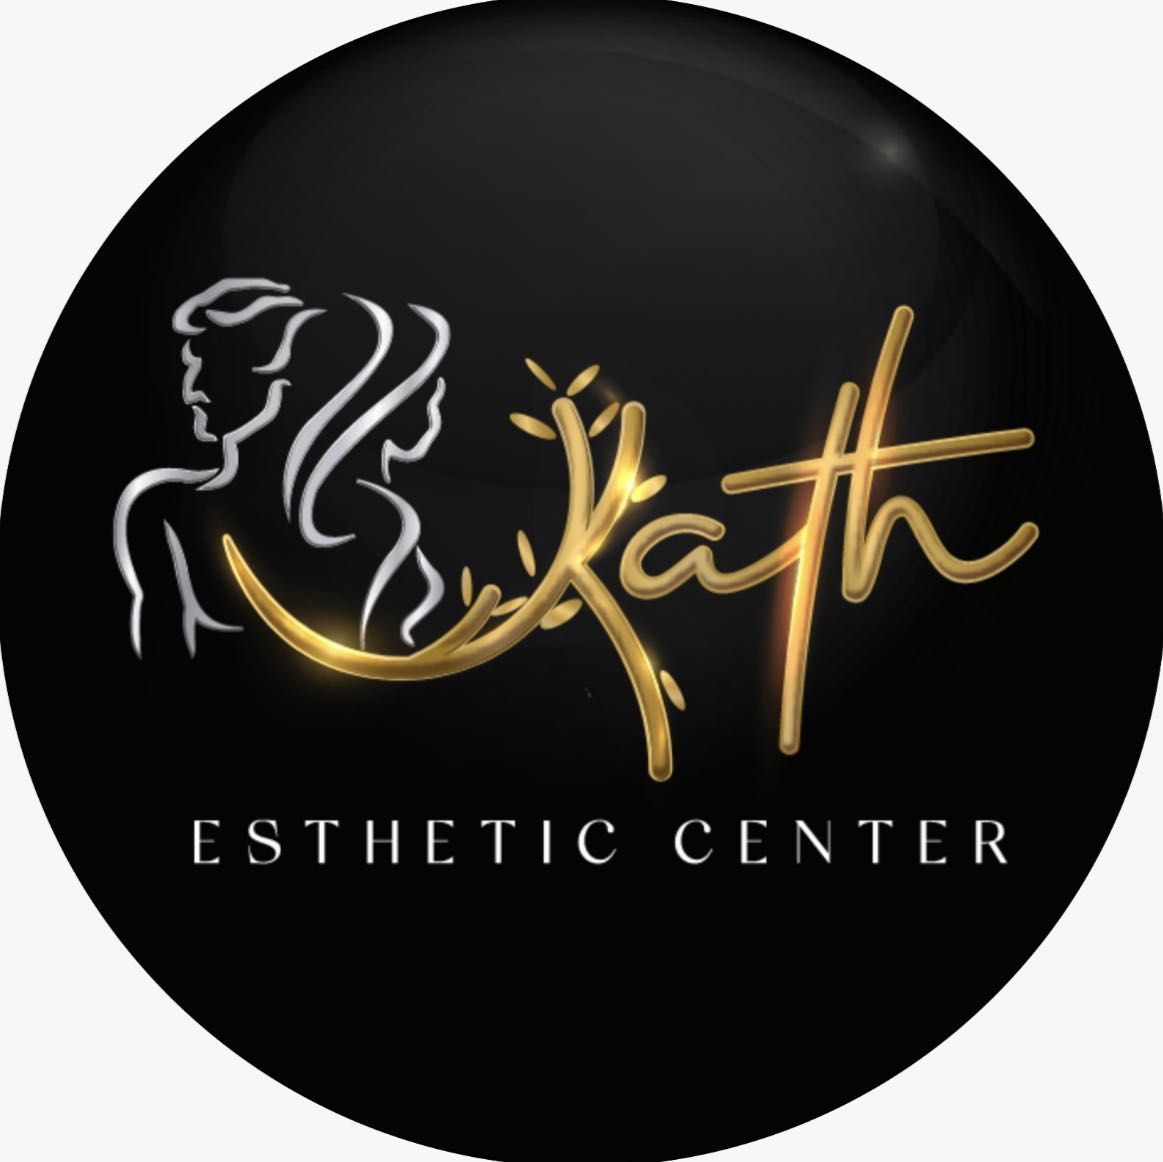 Kath Esthetic Center, 2202 W Waters Ave, Suite 4, Tampa, 33604